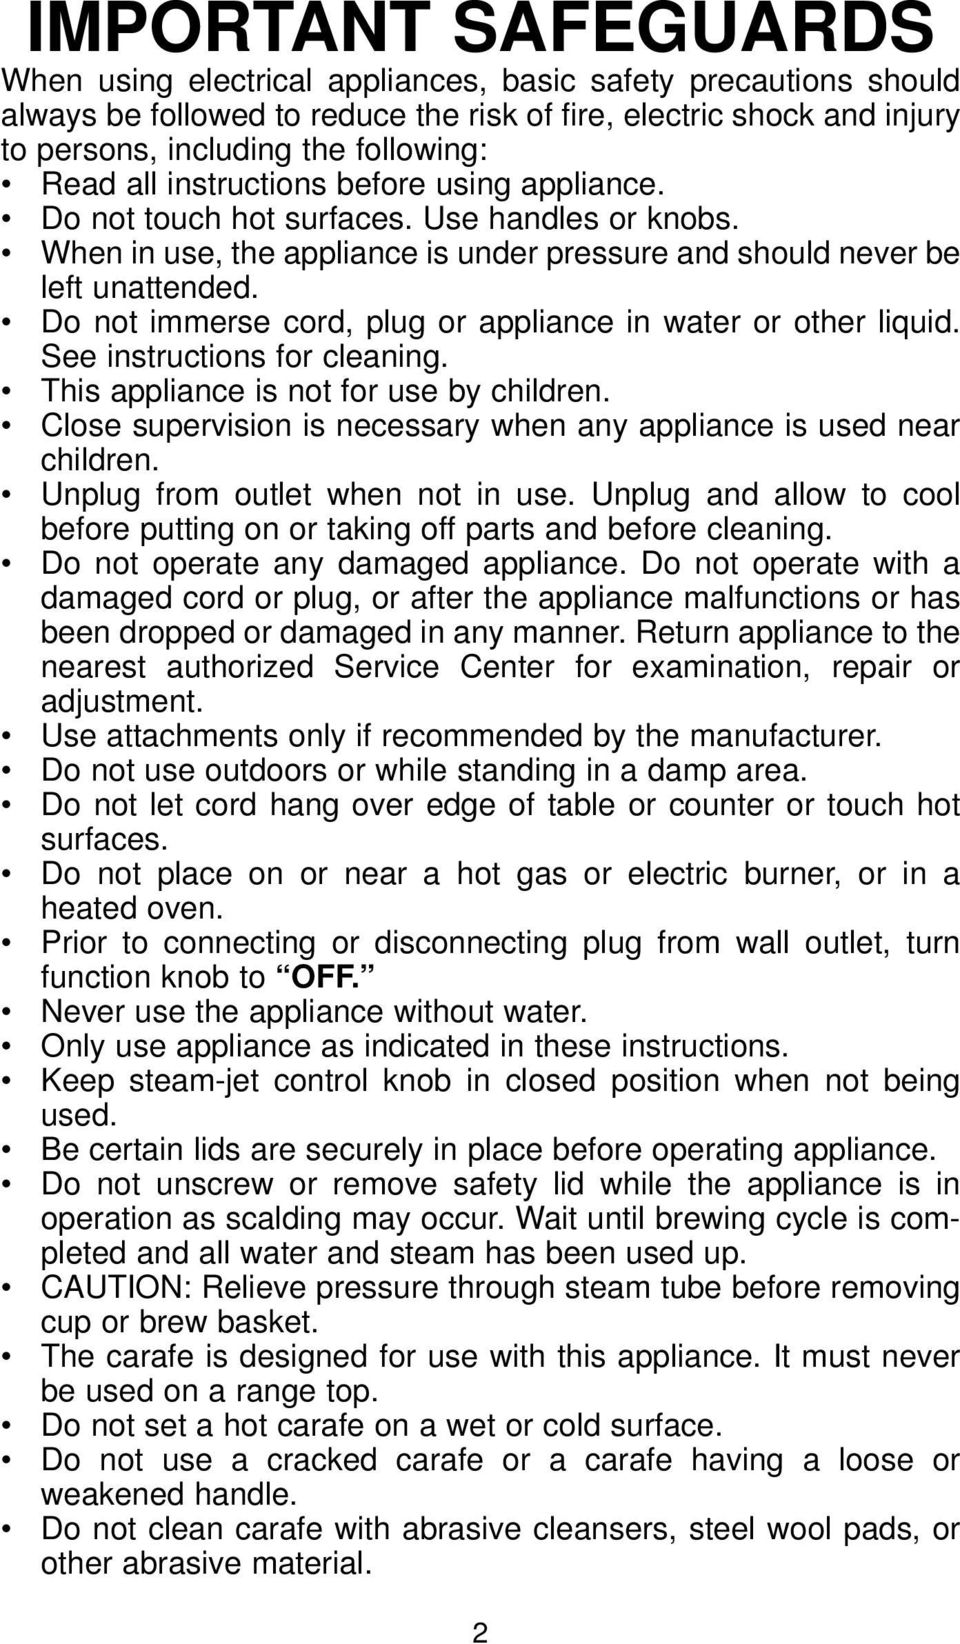 Do not immerse cord, plug or appliance in water or other liquid. See instructions for cleaning. This appliance is not for use by children.